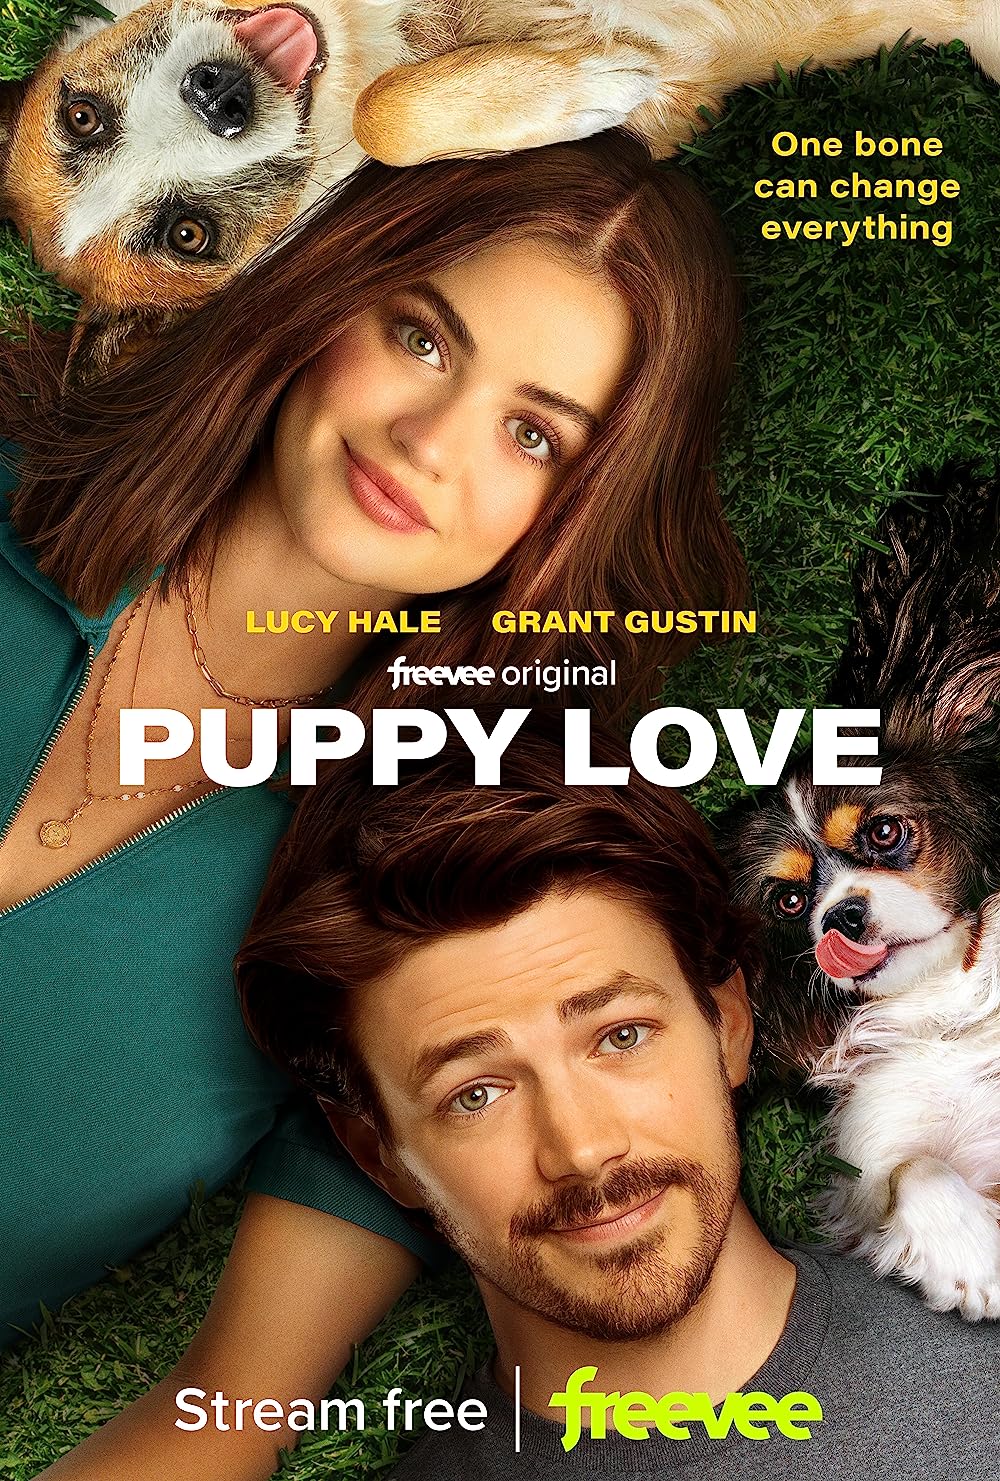 Puppy Love (February 9) - Streaming on Lionsgate PlayPuppy Love is a heartfelt romantic comedy following polar opposites Nicole and Max, played by Lucy Hale and Grant Gustin. They navigate the unexpected pregnancy of their dogs, leading to an awkward partnership that offers a blend of humour and unexpected romance.